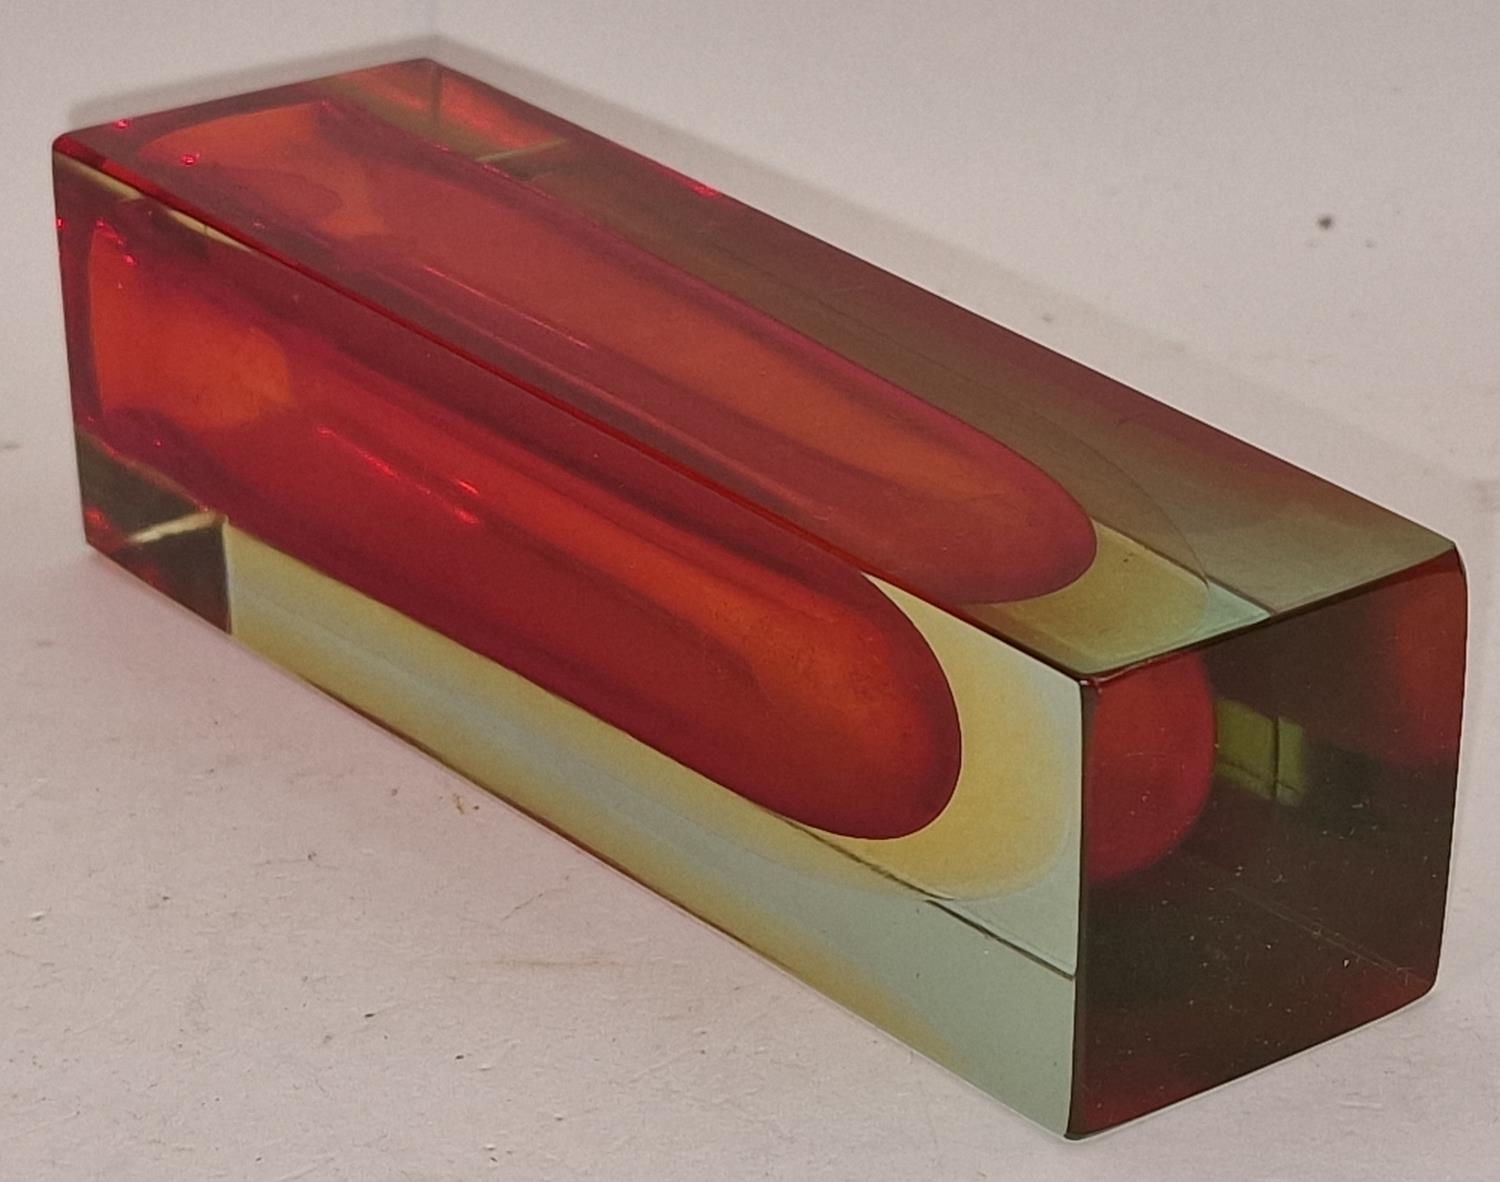 Murano Sommerso 1960's vintage block glass vase in red 15cm tall. - Image 3 of 3